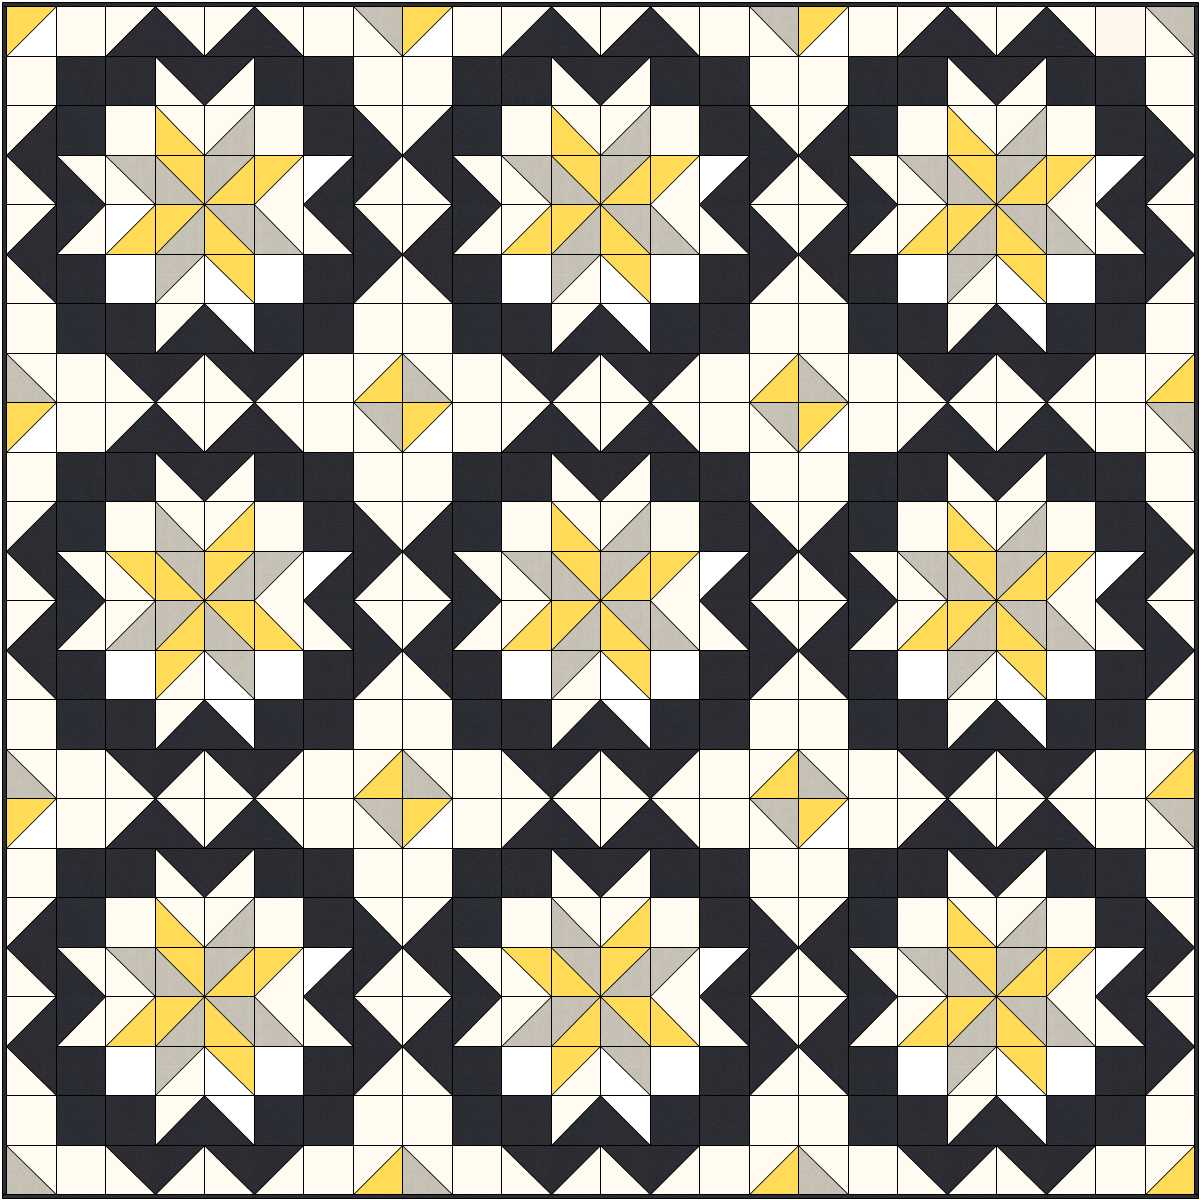 Star Surround Quilt Along from Happy Quilting Melissa | Christa Quilts1200 x 1200